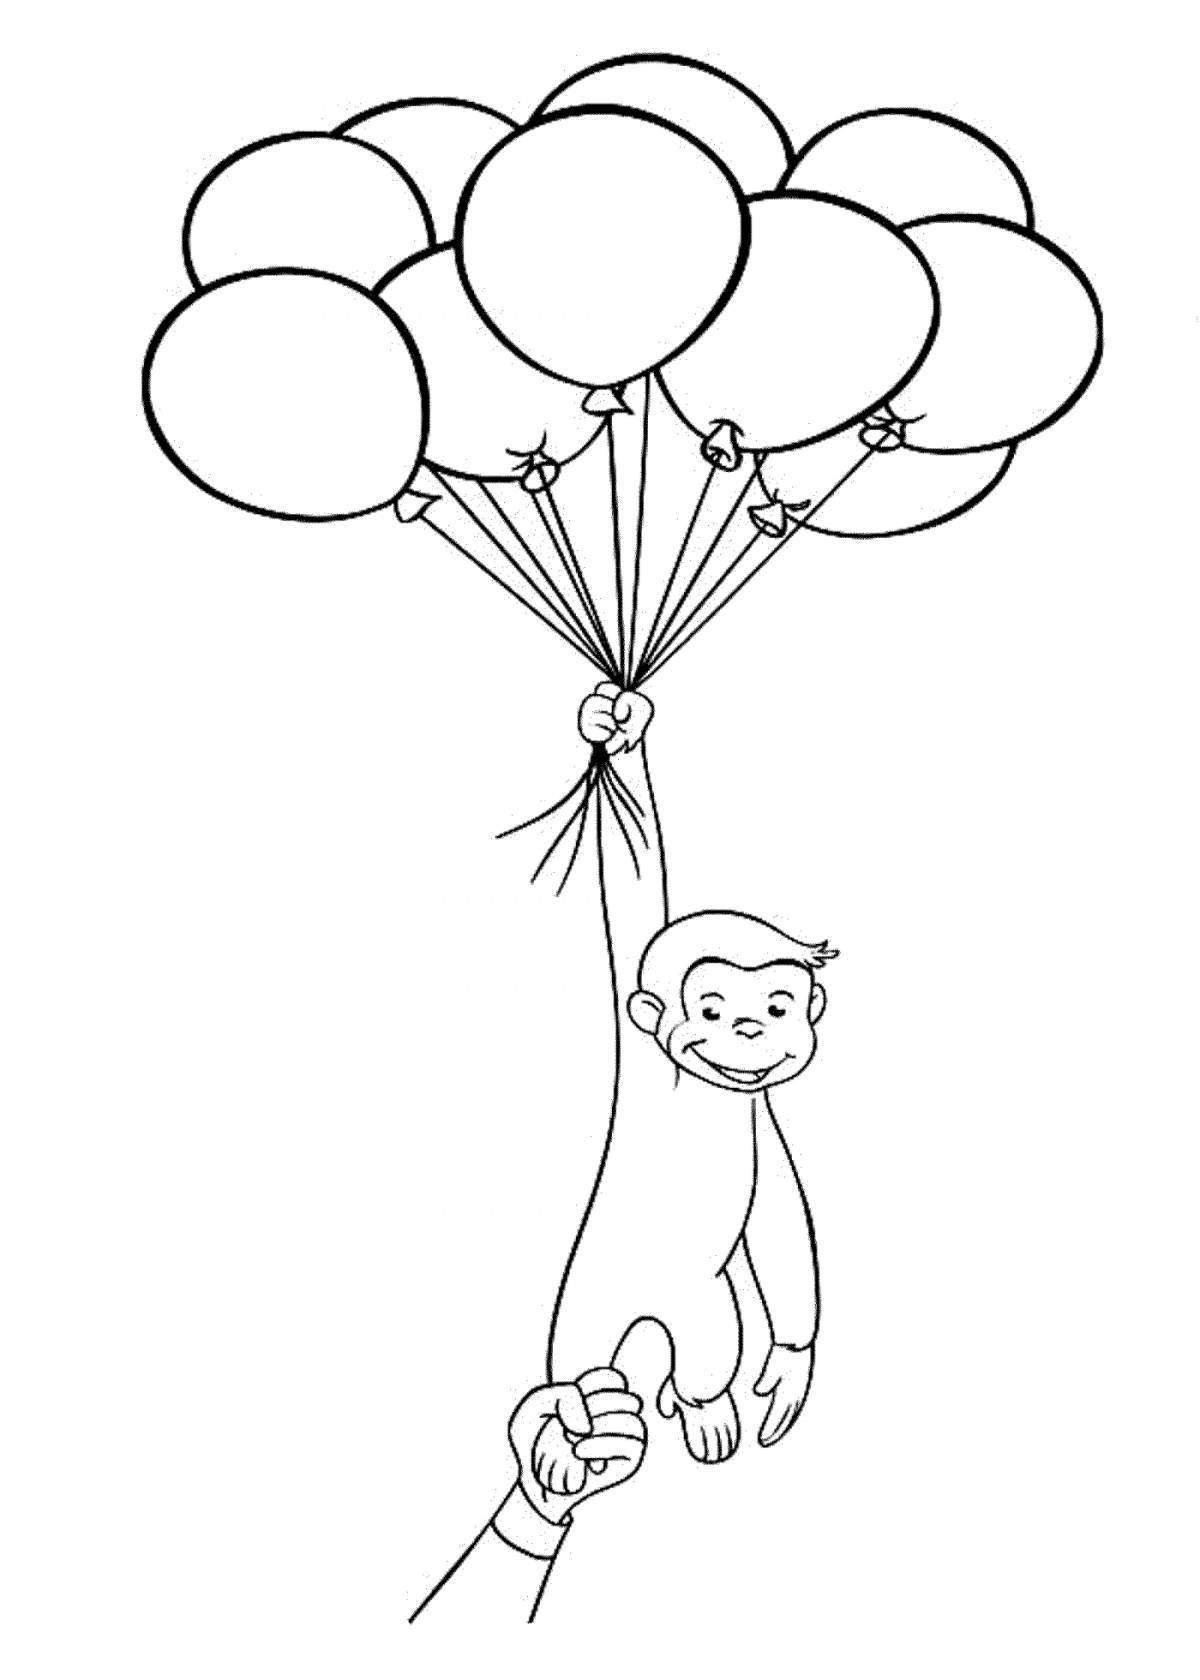 Animated cat with balloons